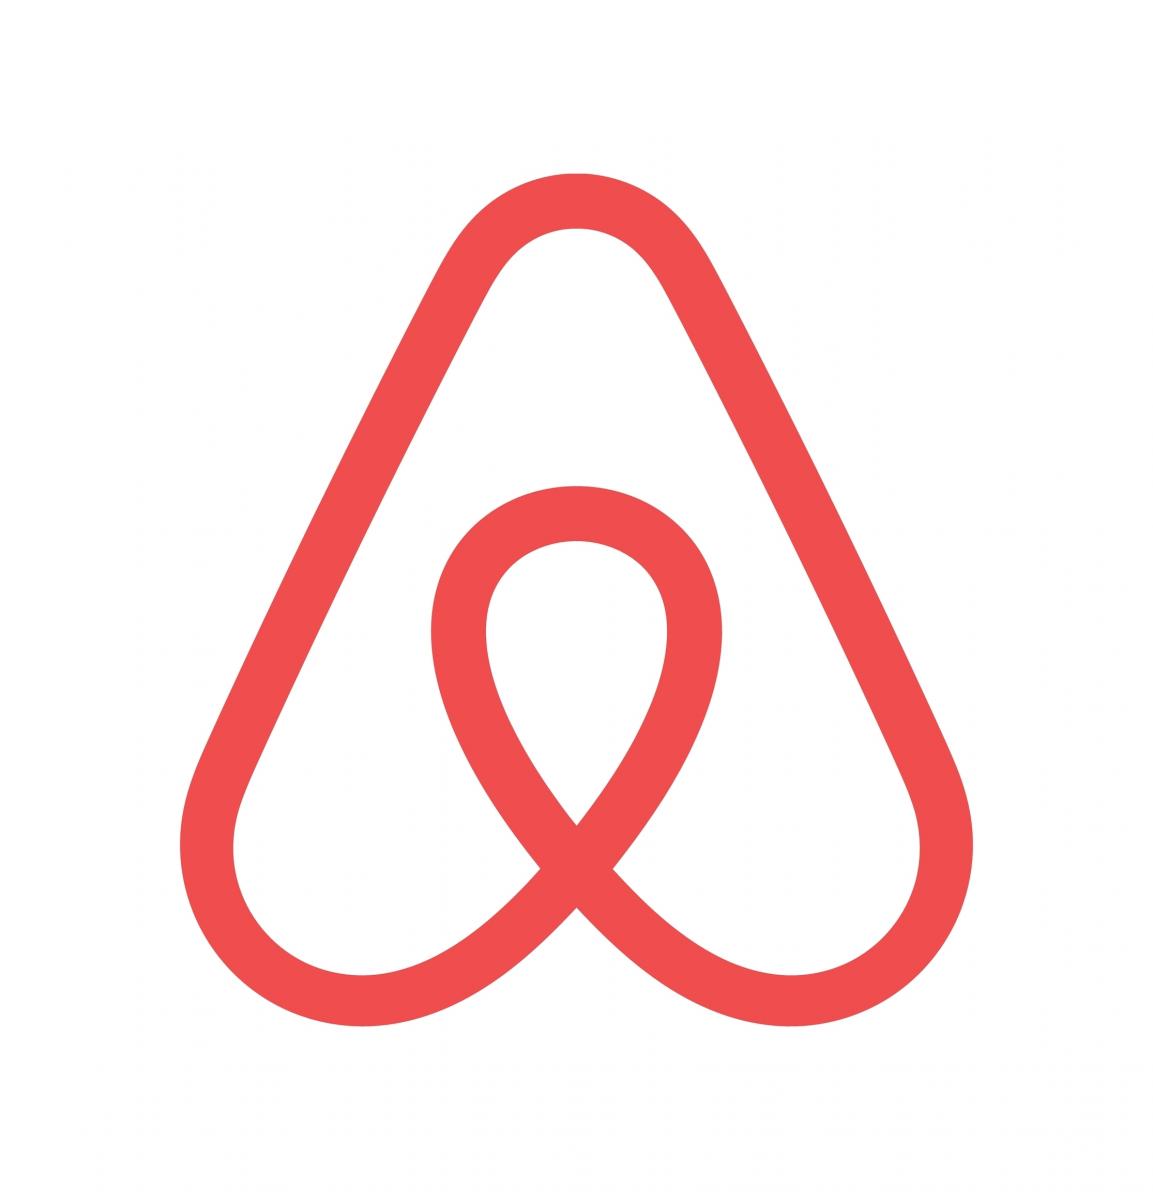 More Time! Call for politicians to extend Airbnb licensing deadline 